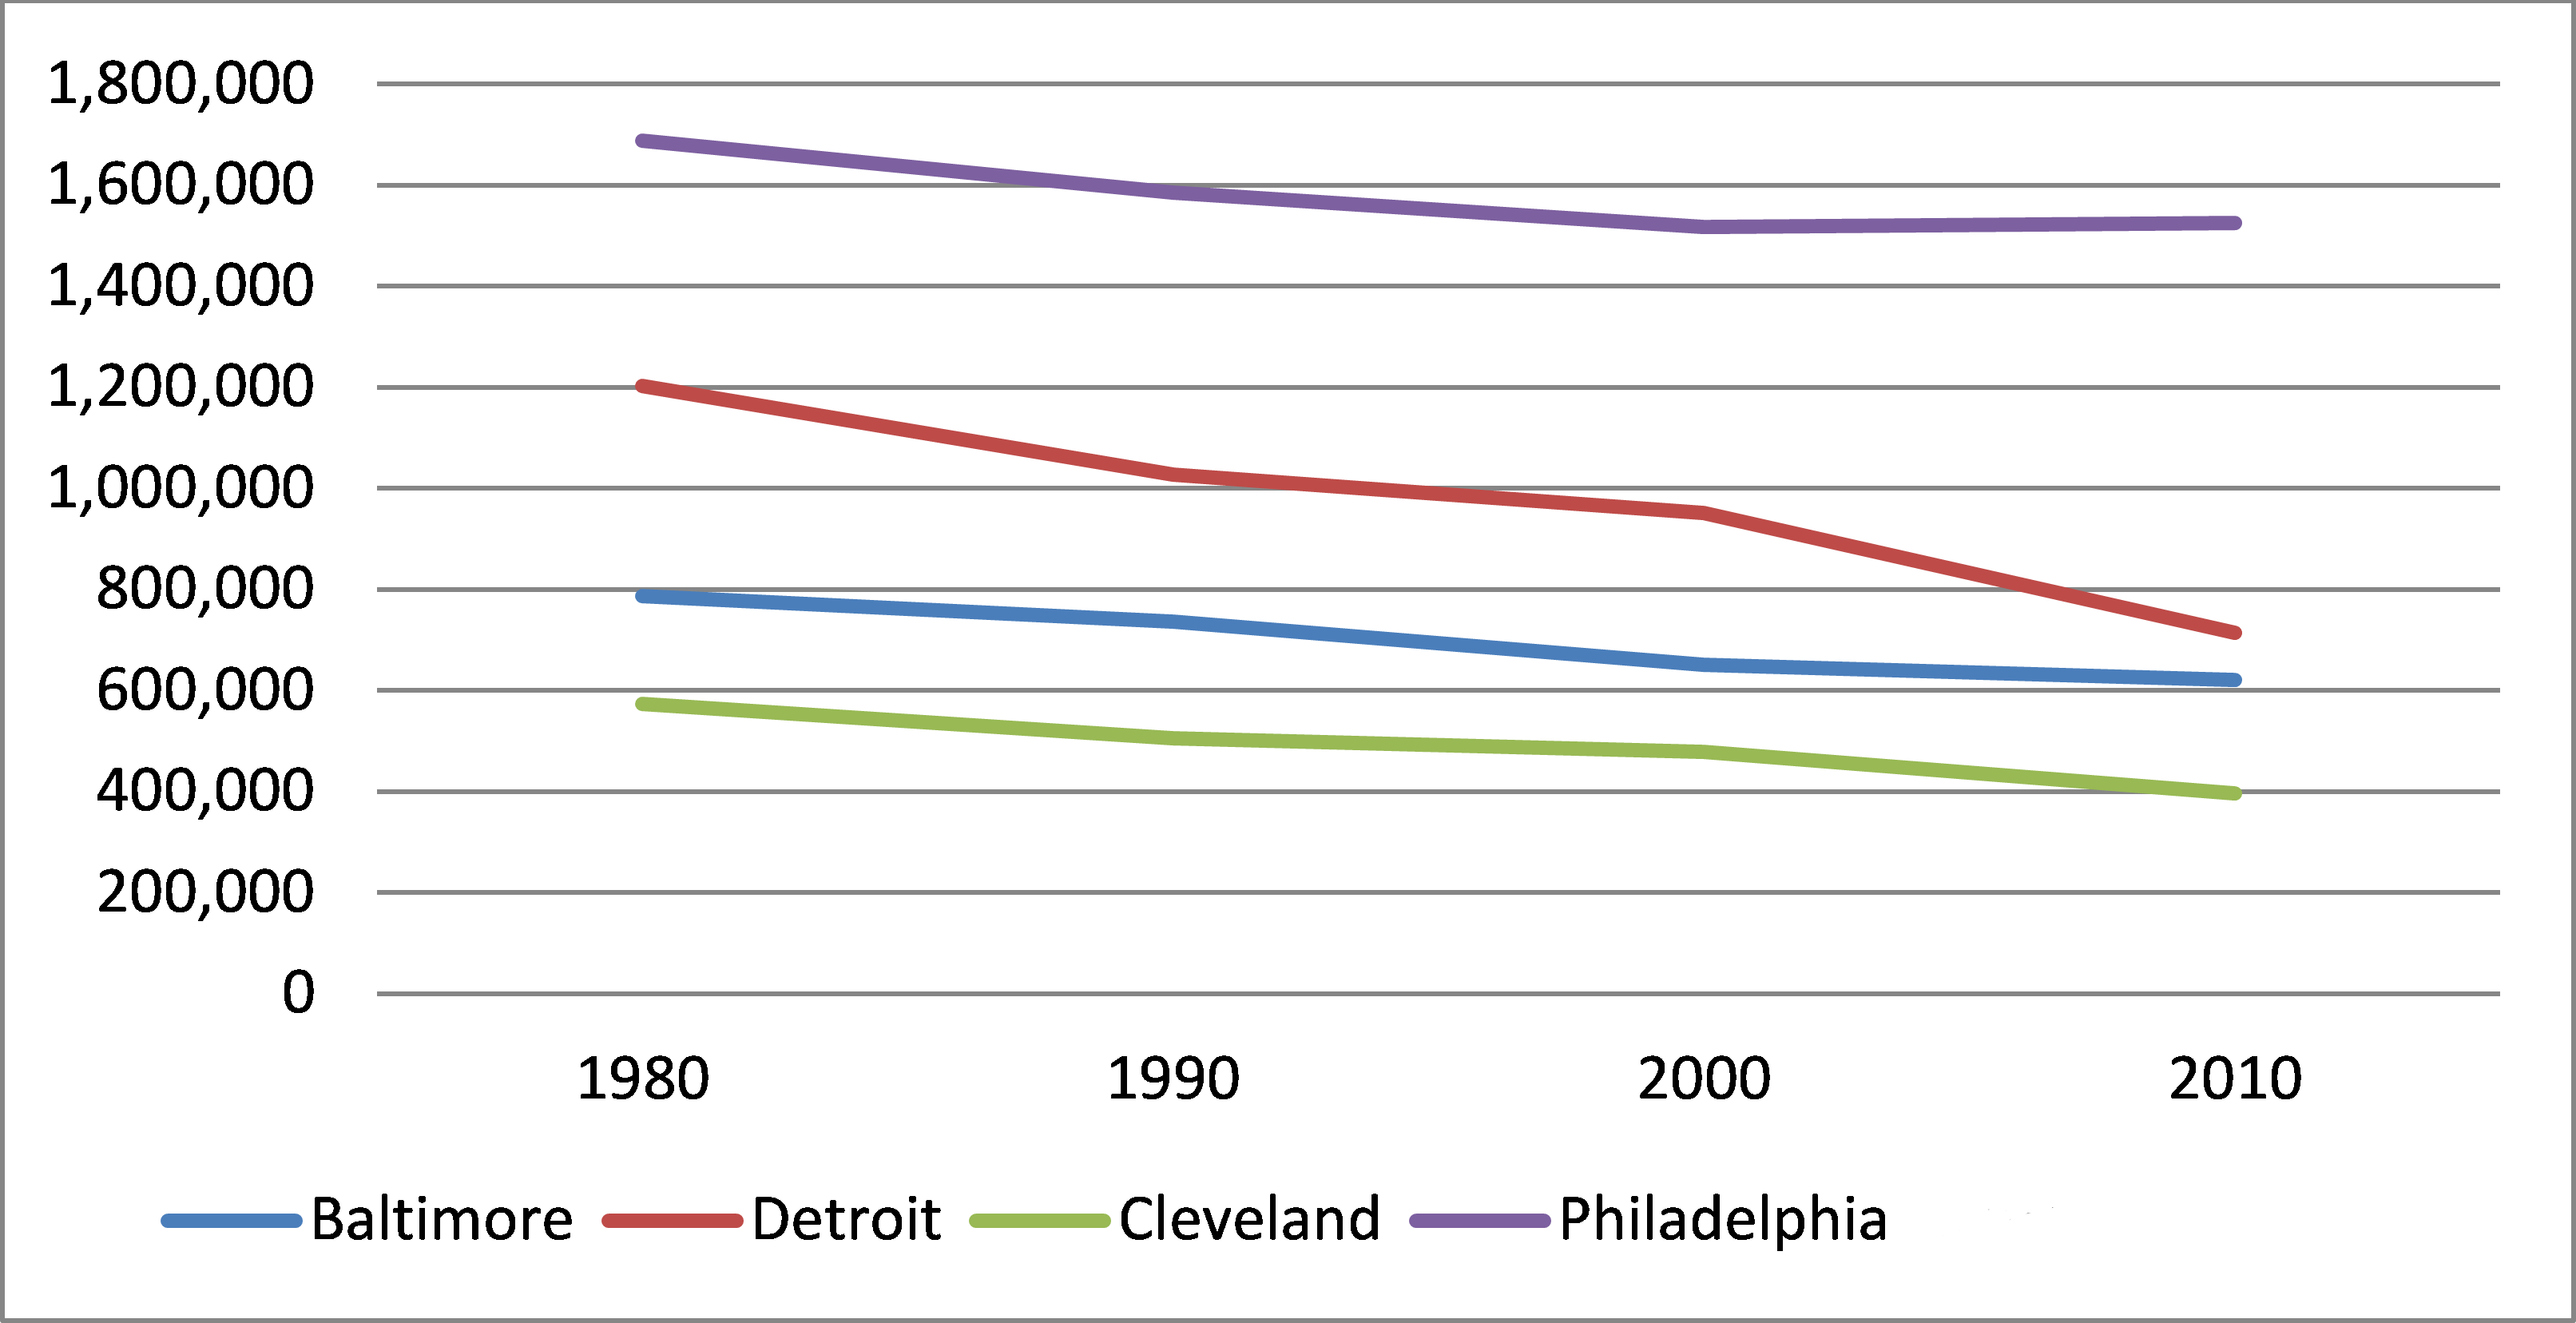 Chart showing population since 1990 in Baltimore, Detroit, Cleveland and Philadelphia. Philadelphia has the highest population.